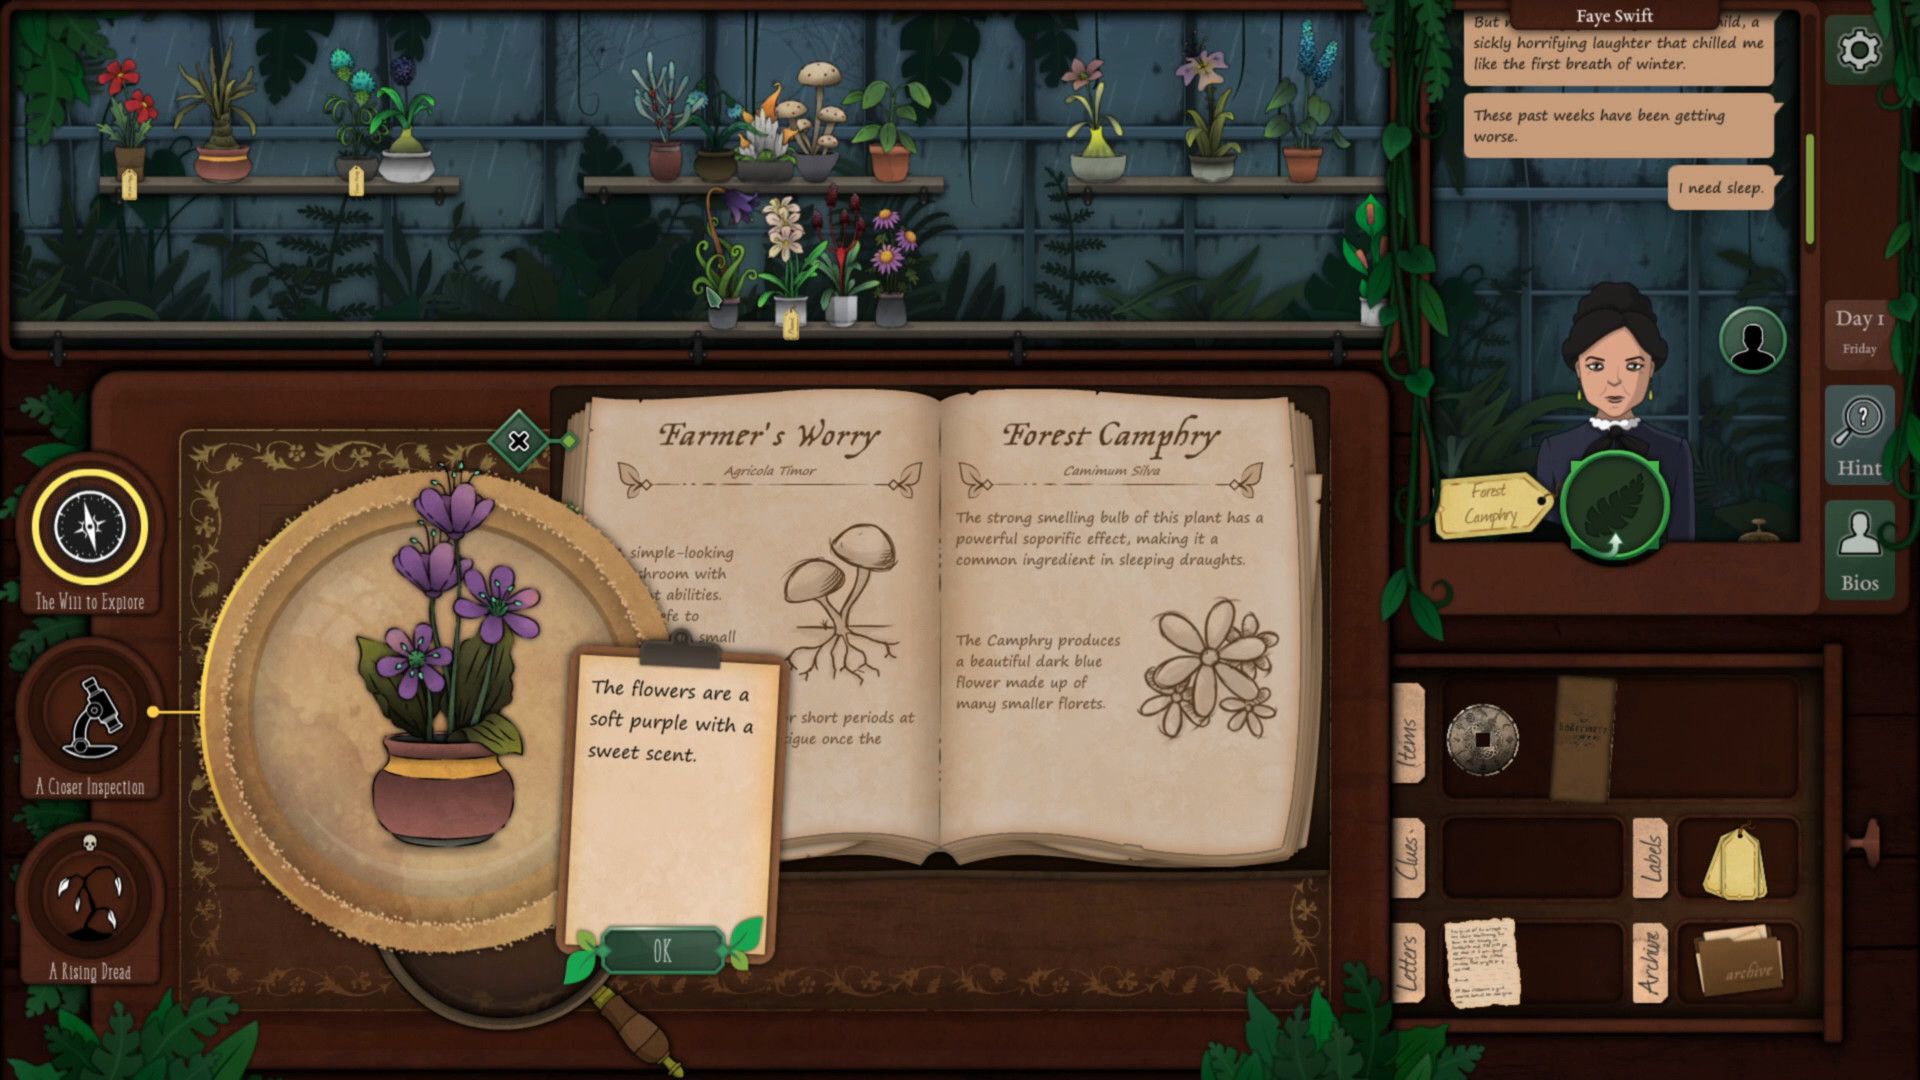 Strange Horticulture User-interface depicting the player identifying the properties of a certain plant.